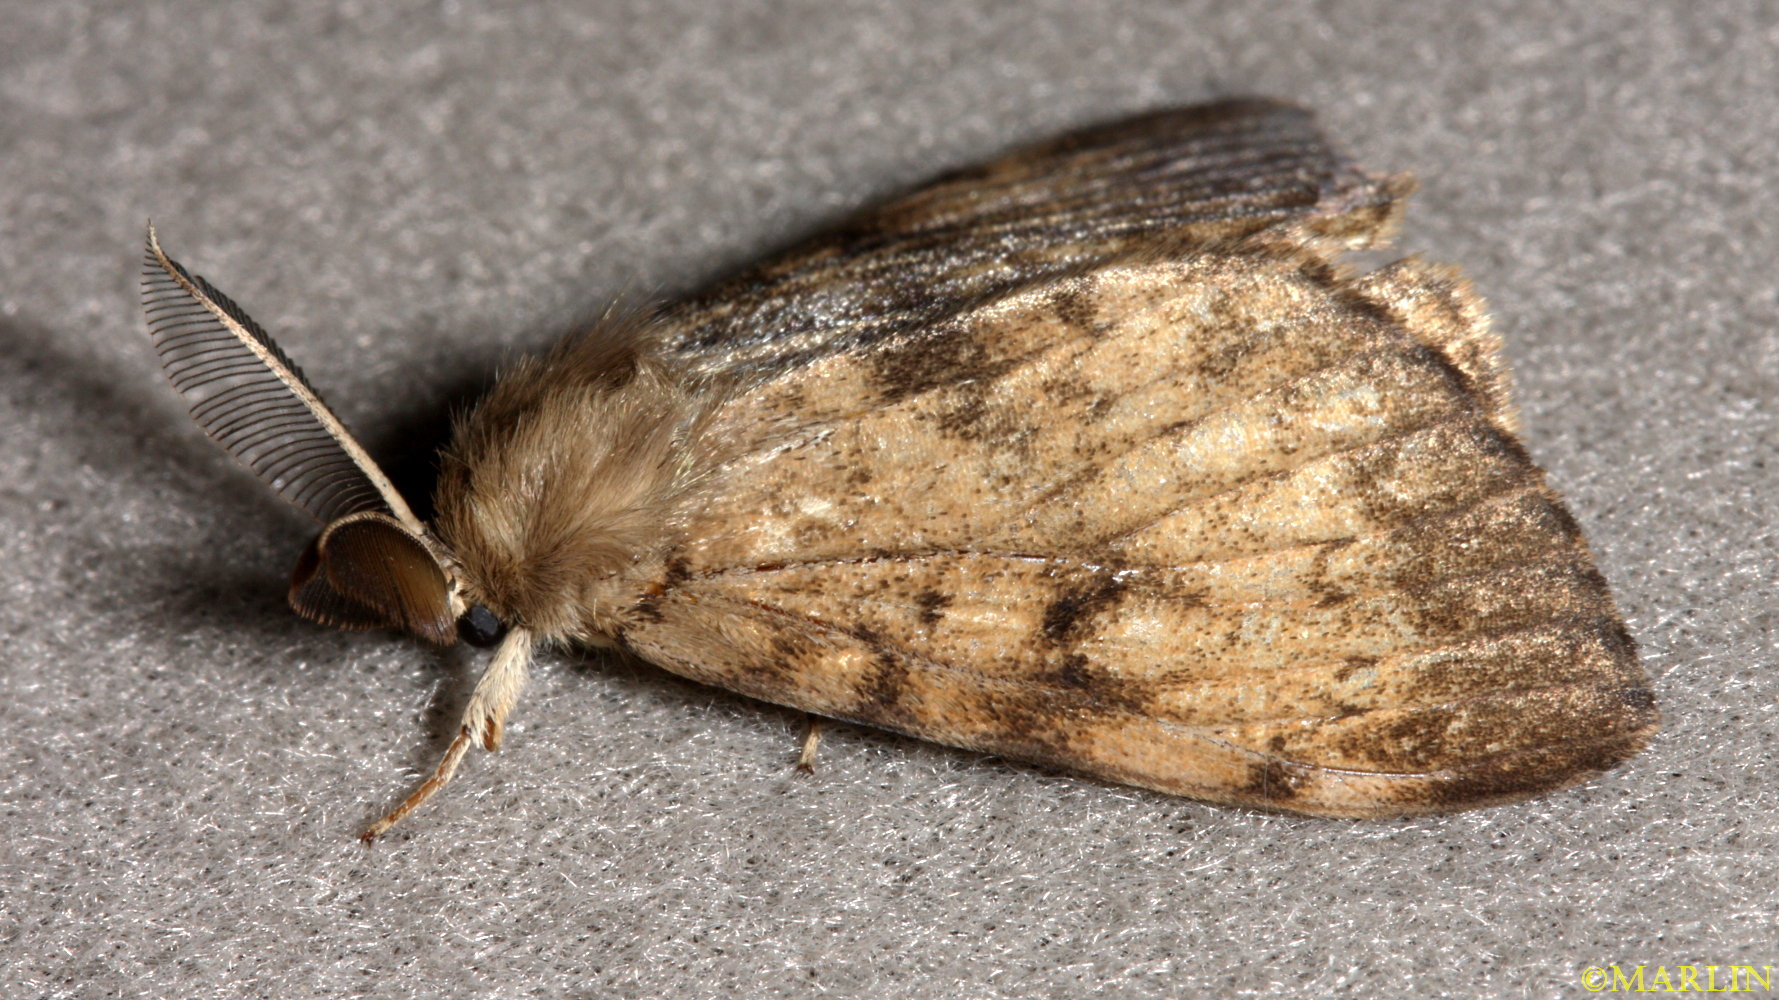 Gypsy Moth lateral view